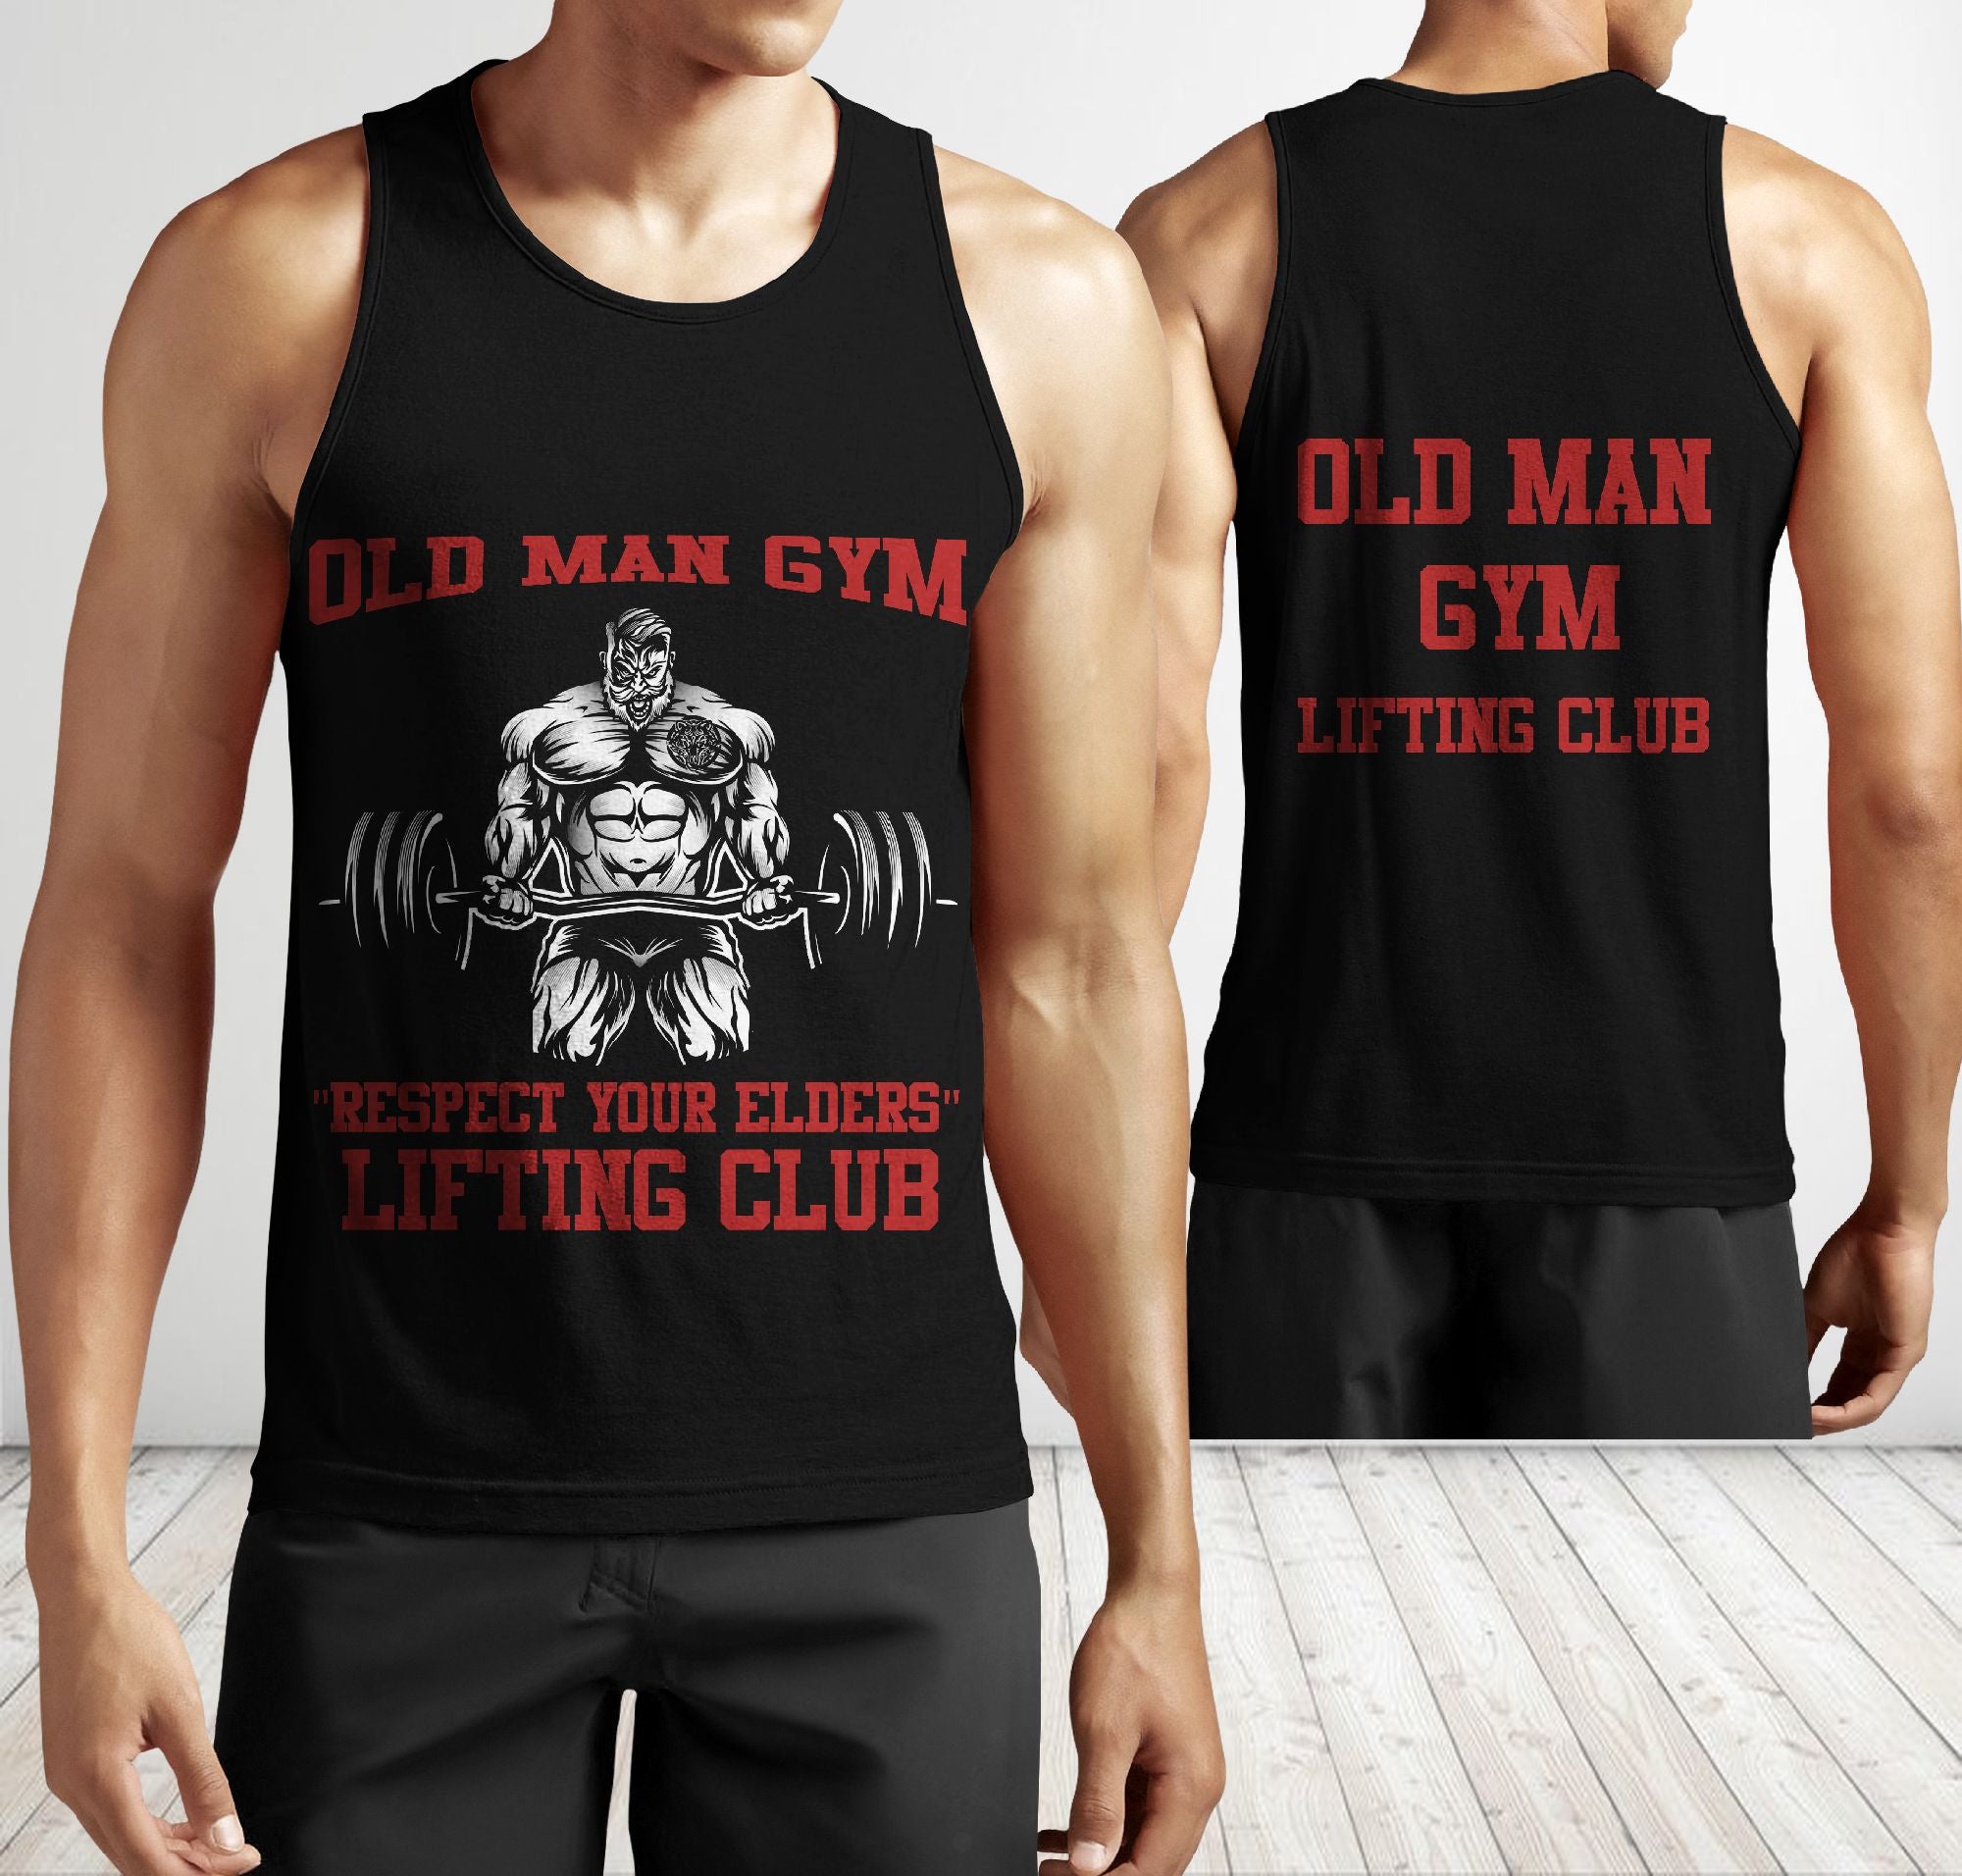 Biceps Funny Workout Shirt, Weight Lifting, Mens Gym Tank Tops, Let Me Know  If My Shirts, Mens Fitness Tank, Workout Tops Men, Gift for Gym -   Canada